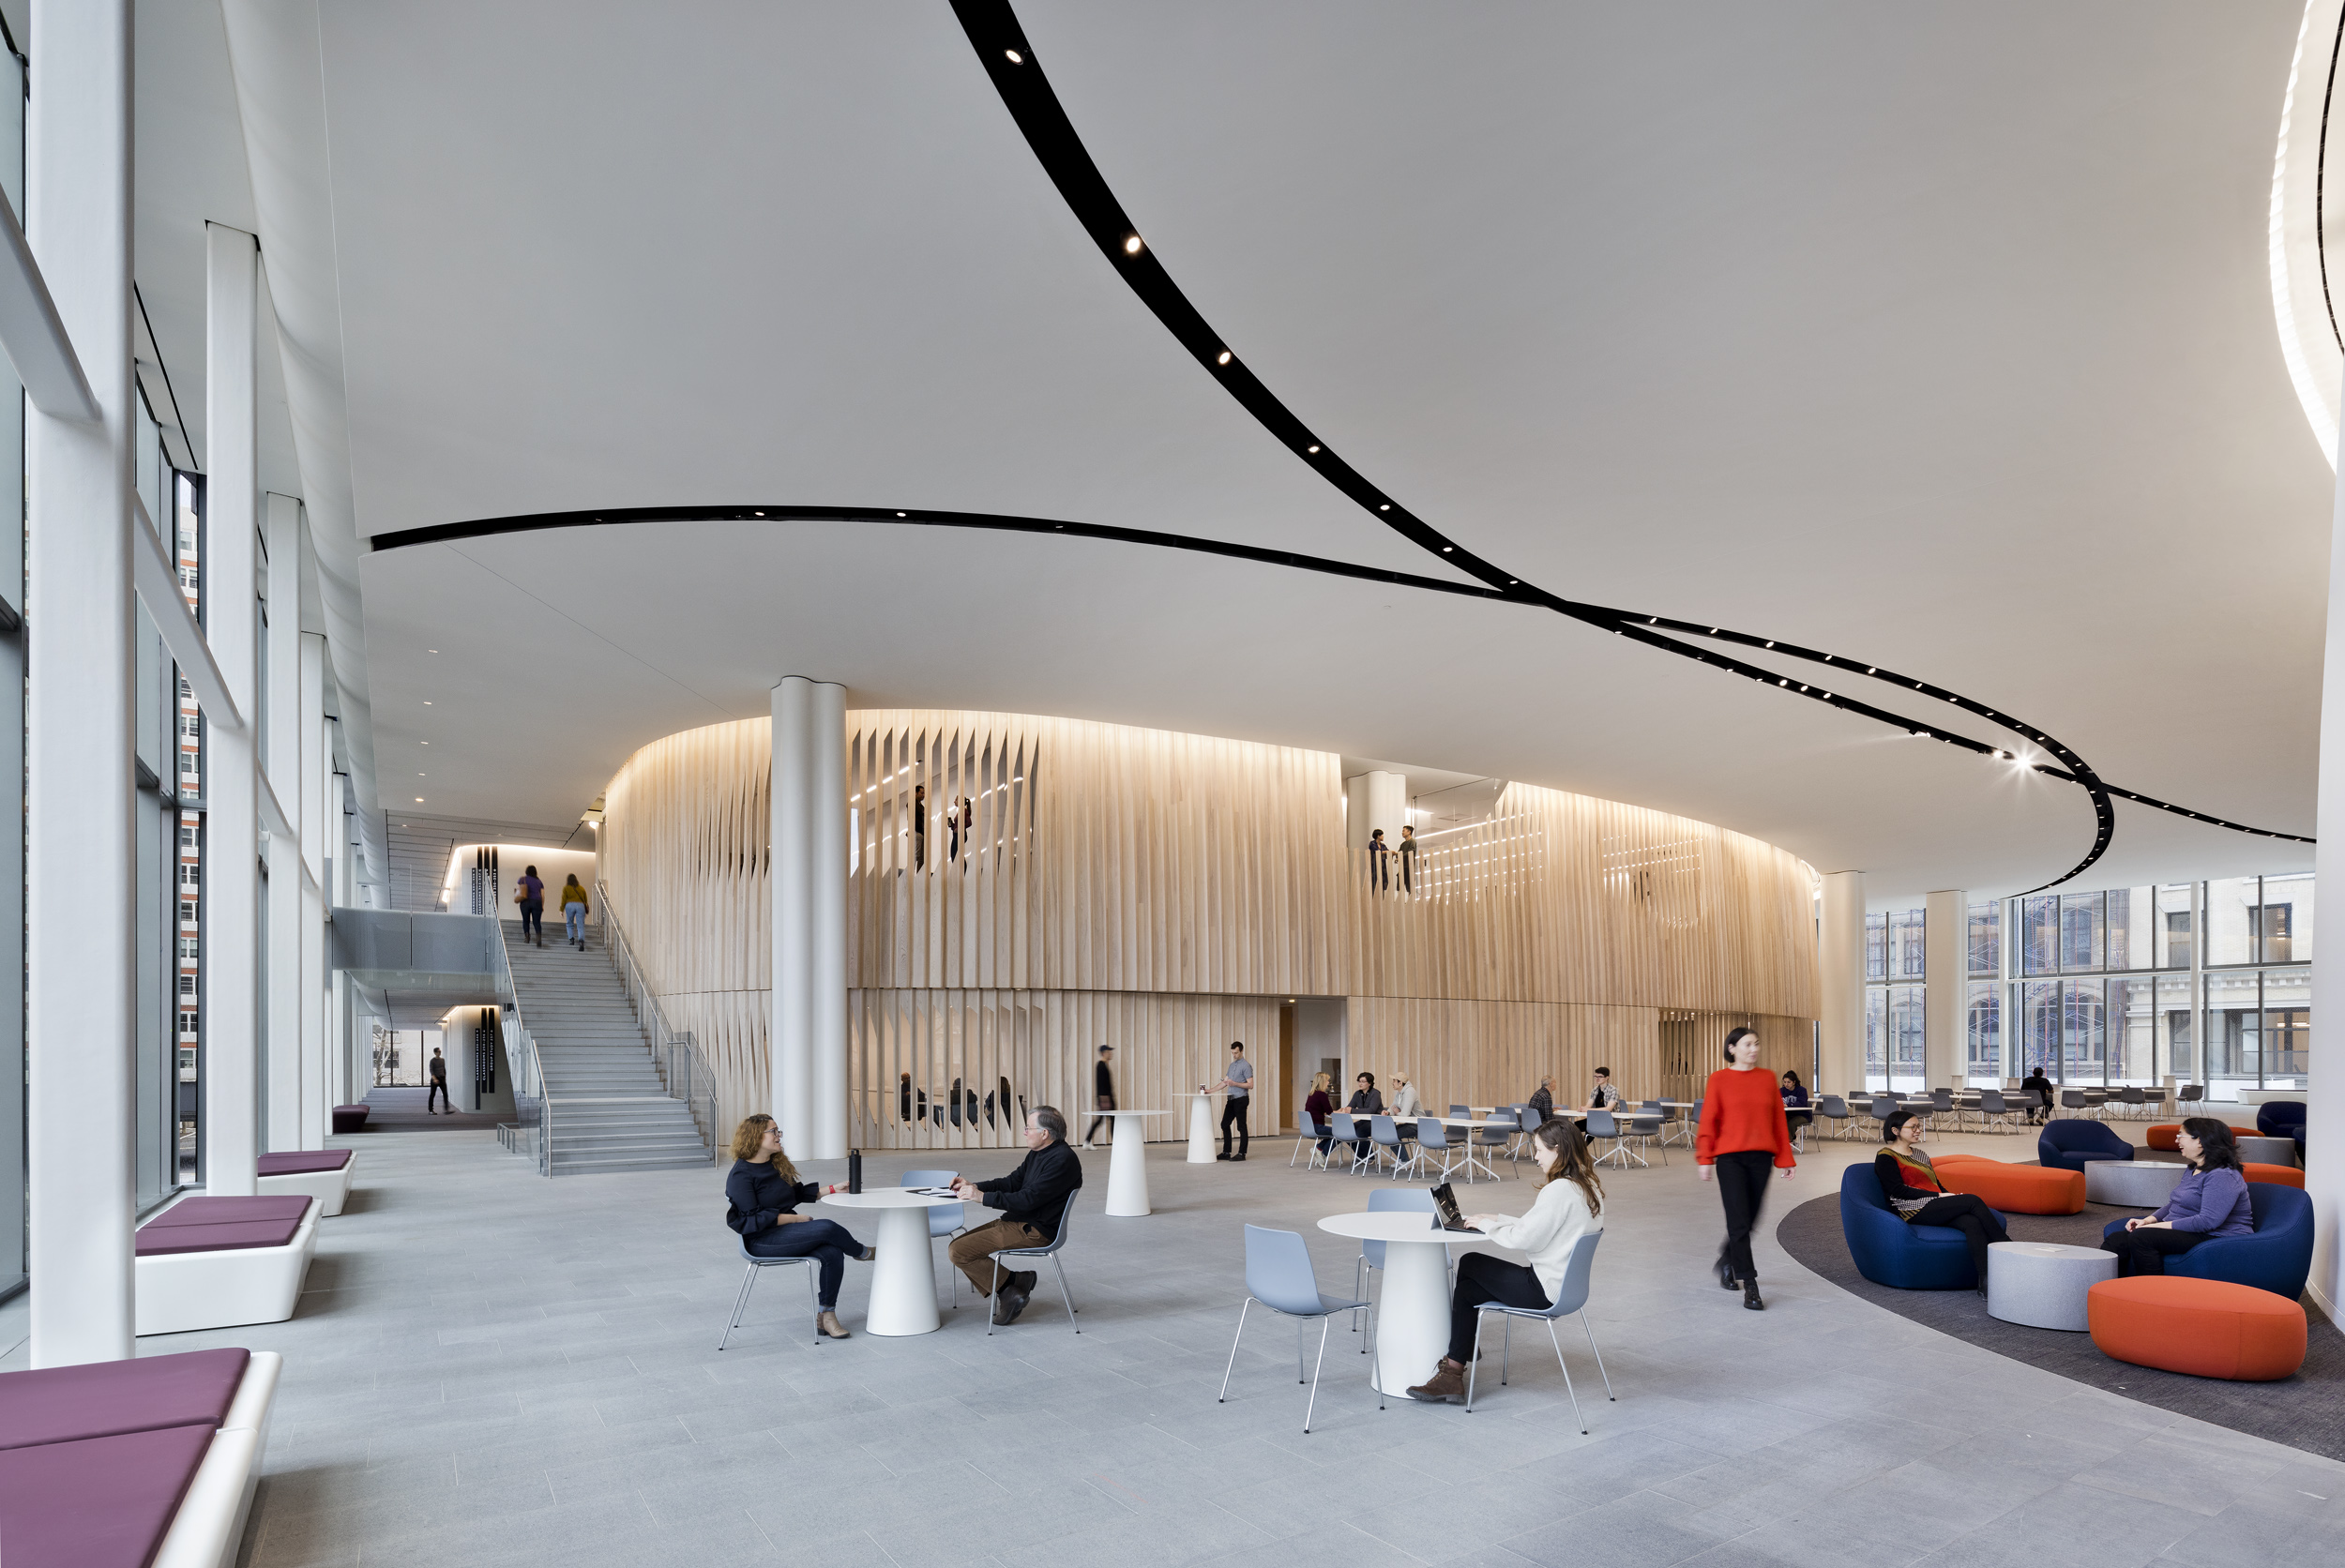 <p>The building is organized into "neighborhoods" connected to an open and expansive commons for collaborative study and meeting space. <small>&copy; Connie Zhou / JBSA</small></p>